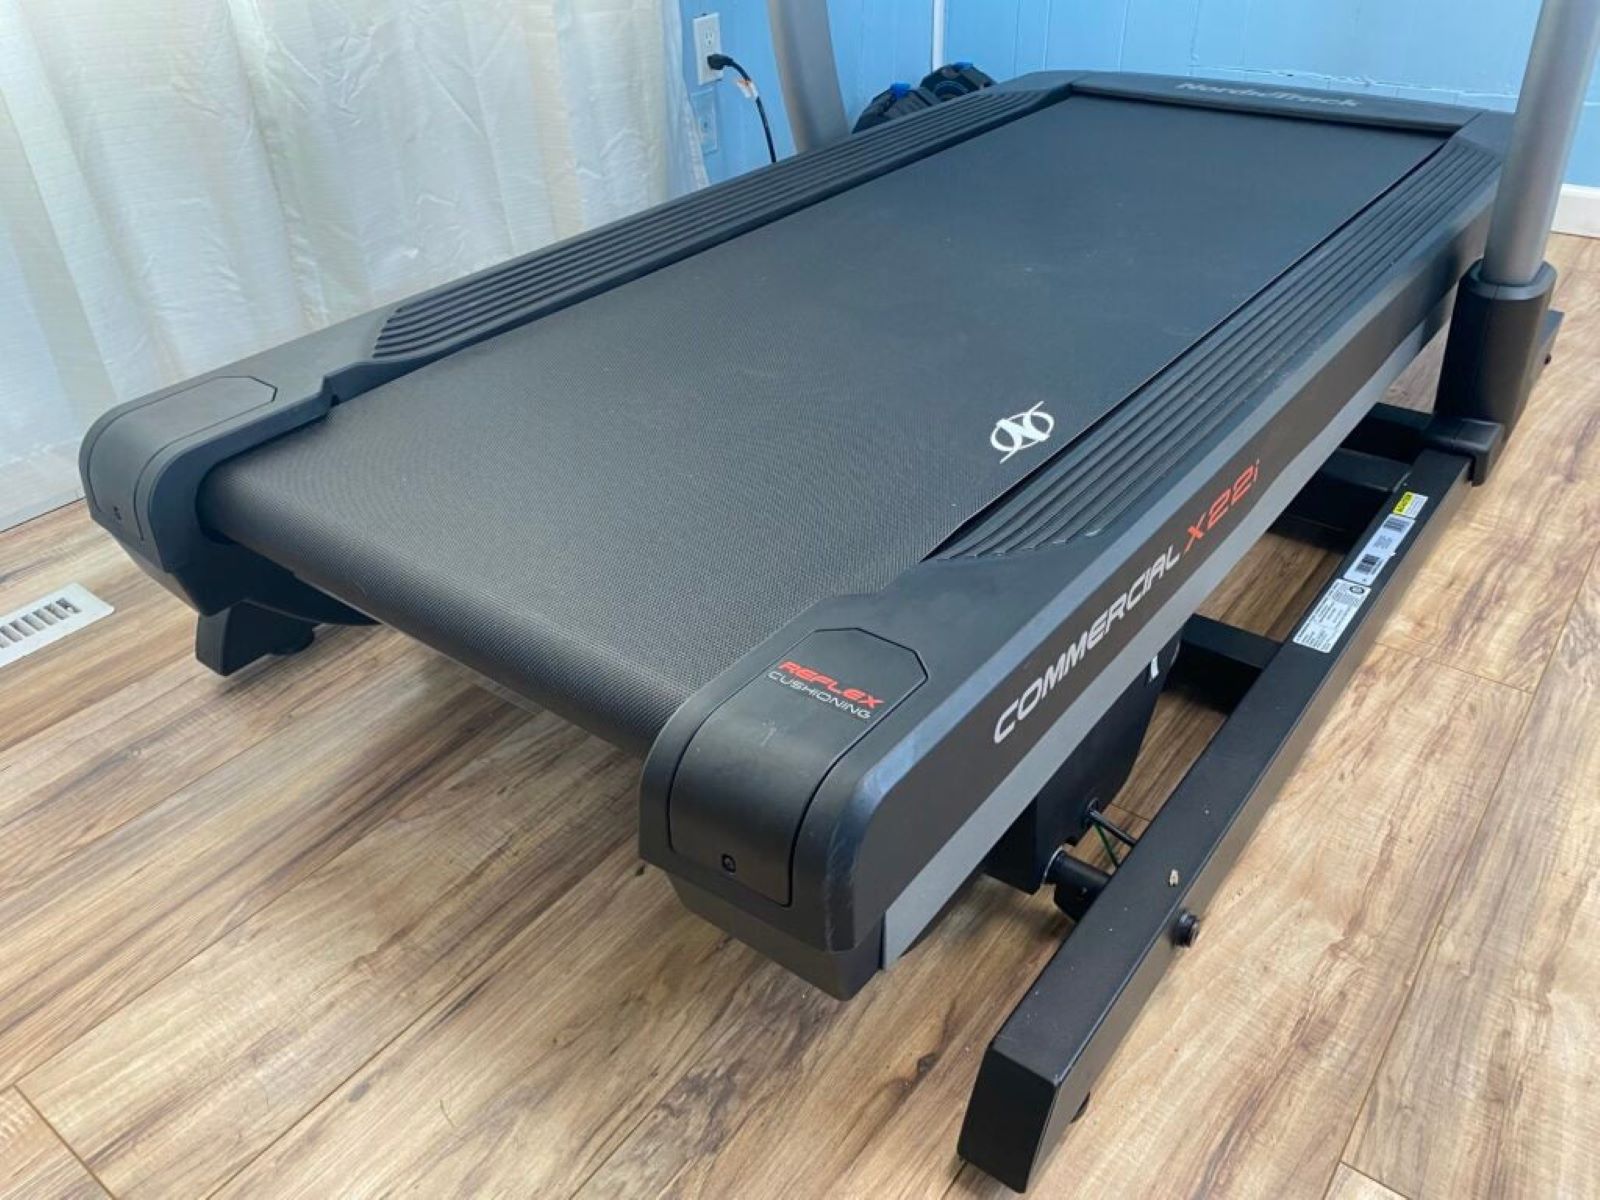 How To Dismantle Treadmill